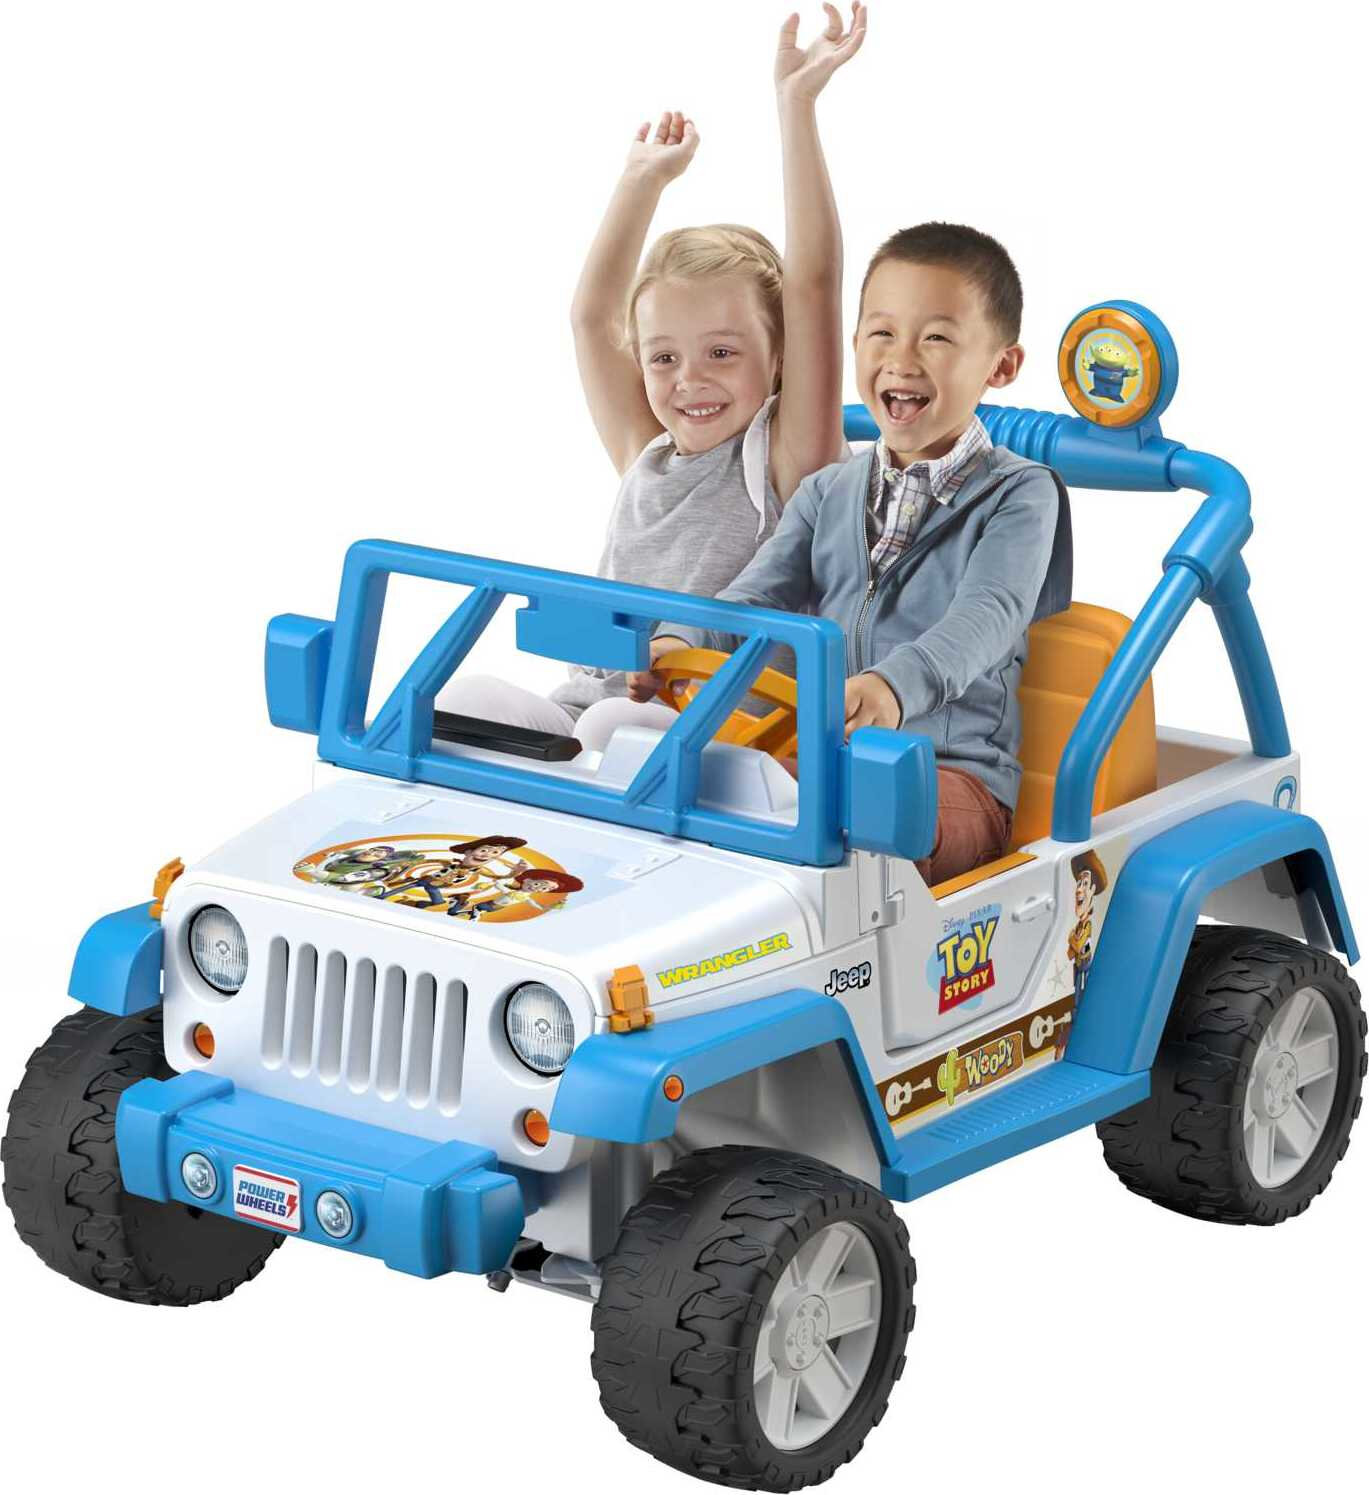 Power Wheels Disney Pixar Toy Story Jeep Wrangler Battery Powered Ride-On Vehicle with Sounds, 12V - image 4 of 8